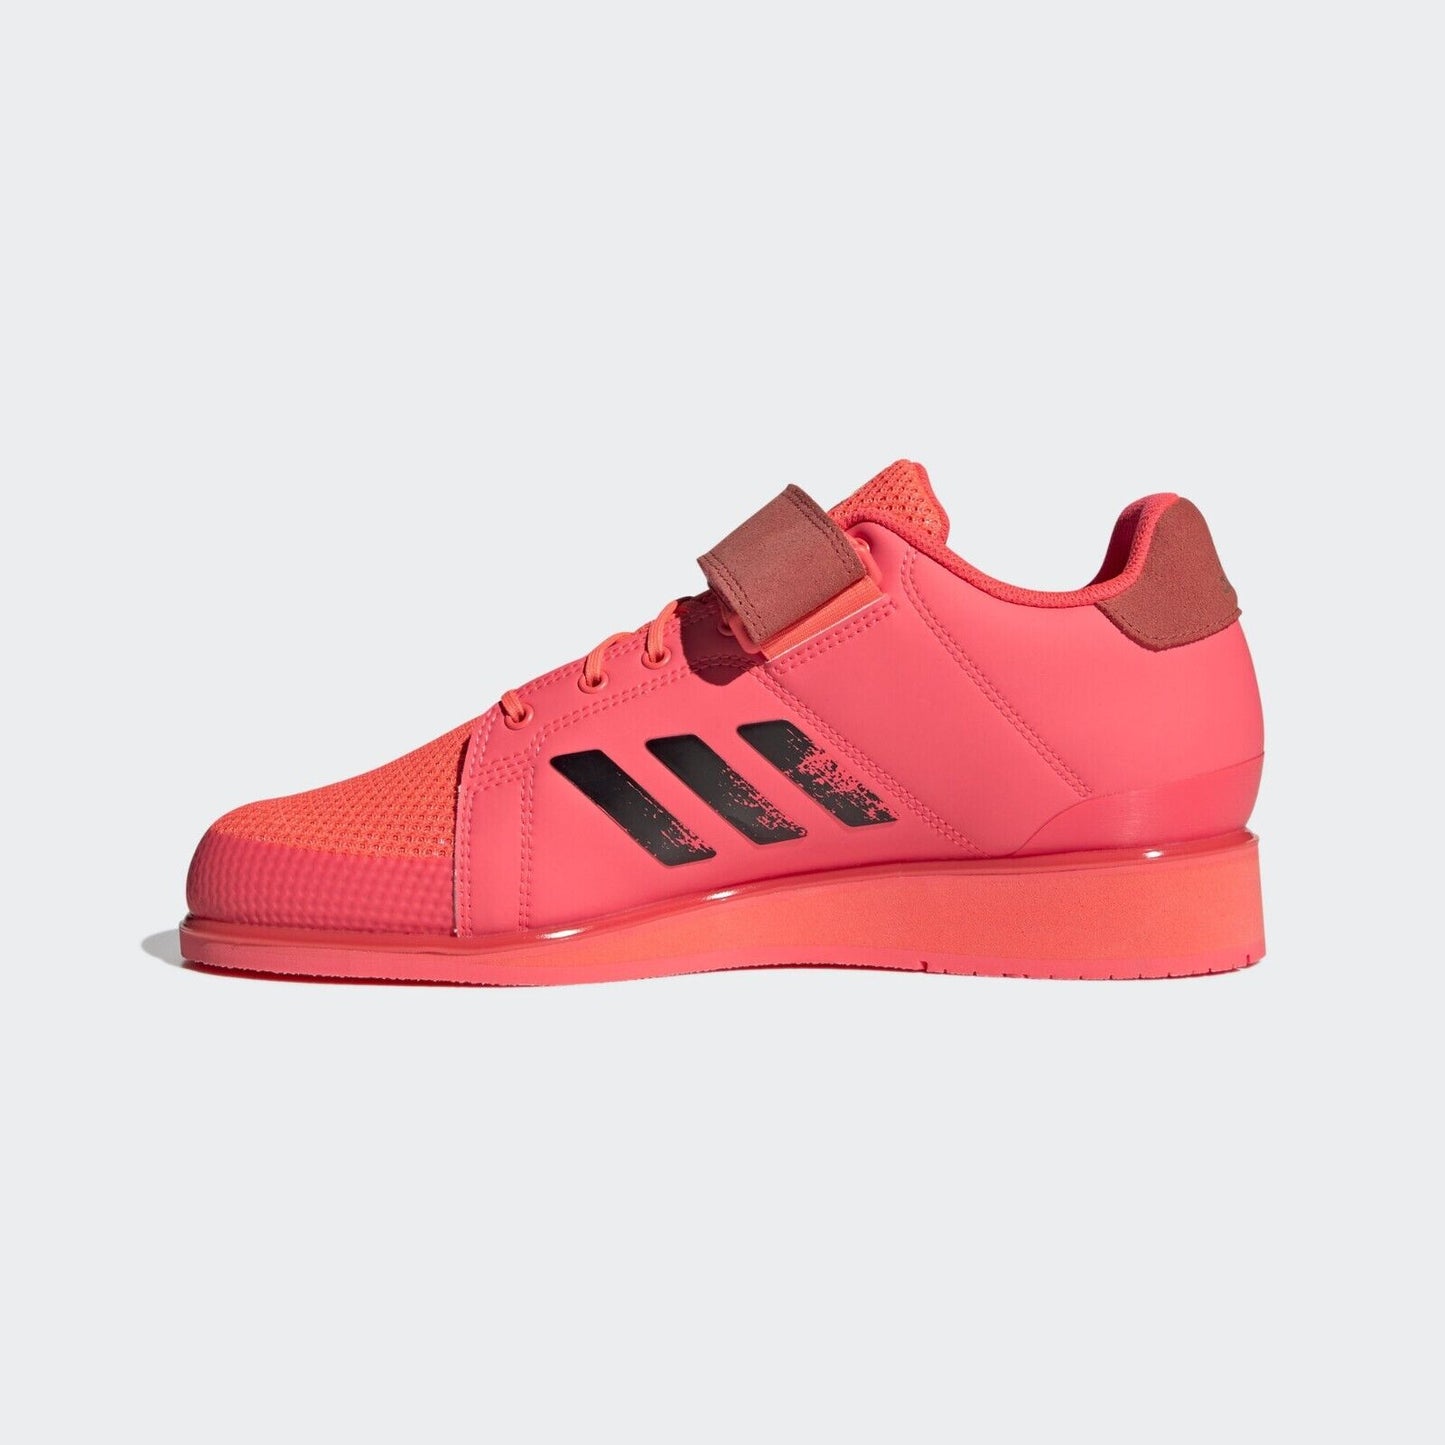 adidas Power Perfect 3 Mens Weightlifting Shoes SIZE 9.5 10 7 Bodybuilding Pink